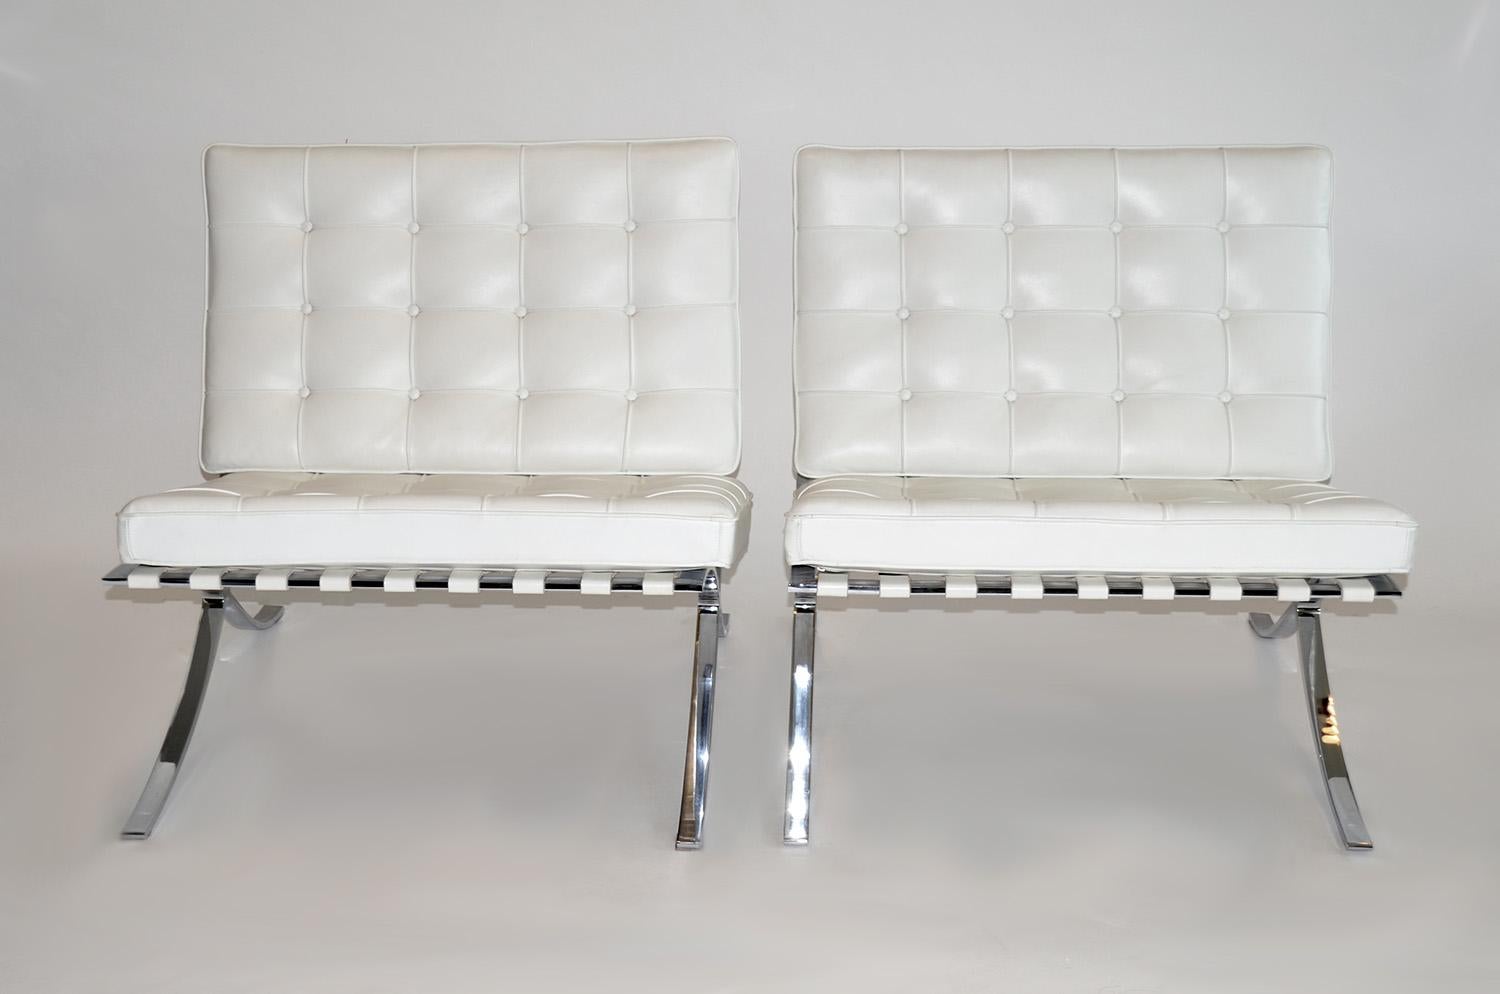 Pair of Knoll Barcelona lounge chairs in white Sabrina leather circa 2000s. Ludwig Mies van der Rohe 1929 excellent condition

One of the most recognized objects of the last century and an icon of the modern movement, the Barcelona Chair exudes a